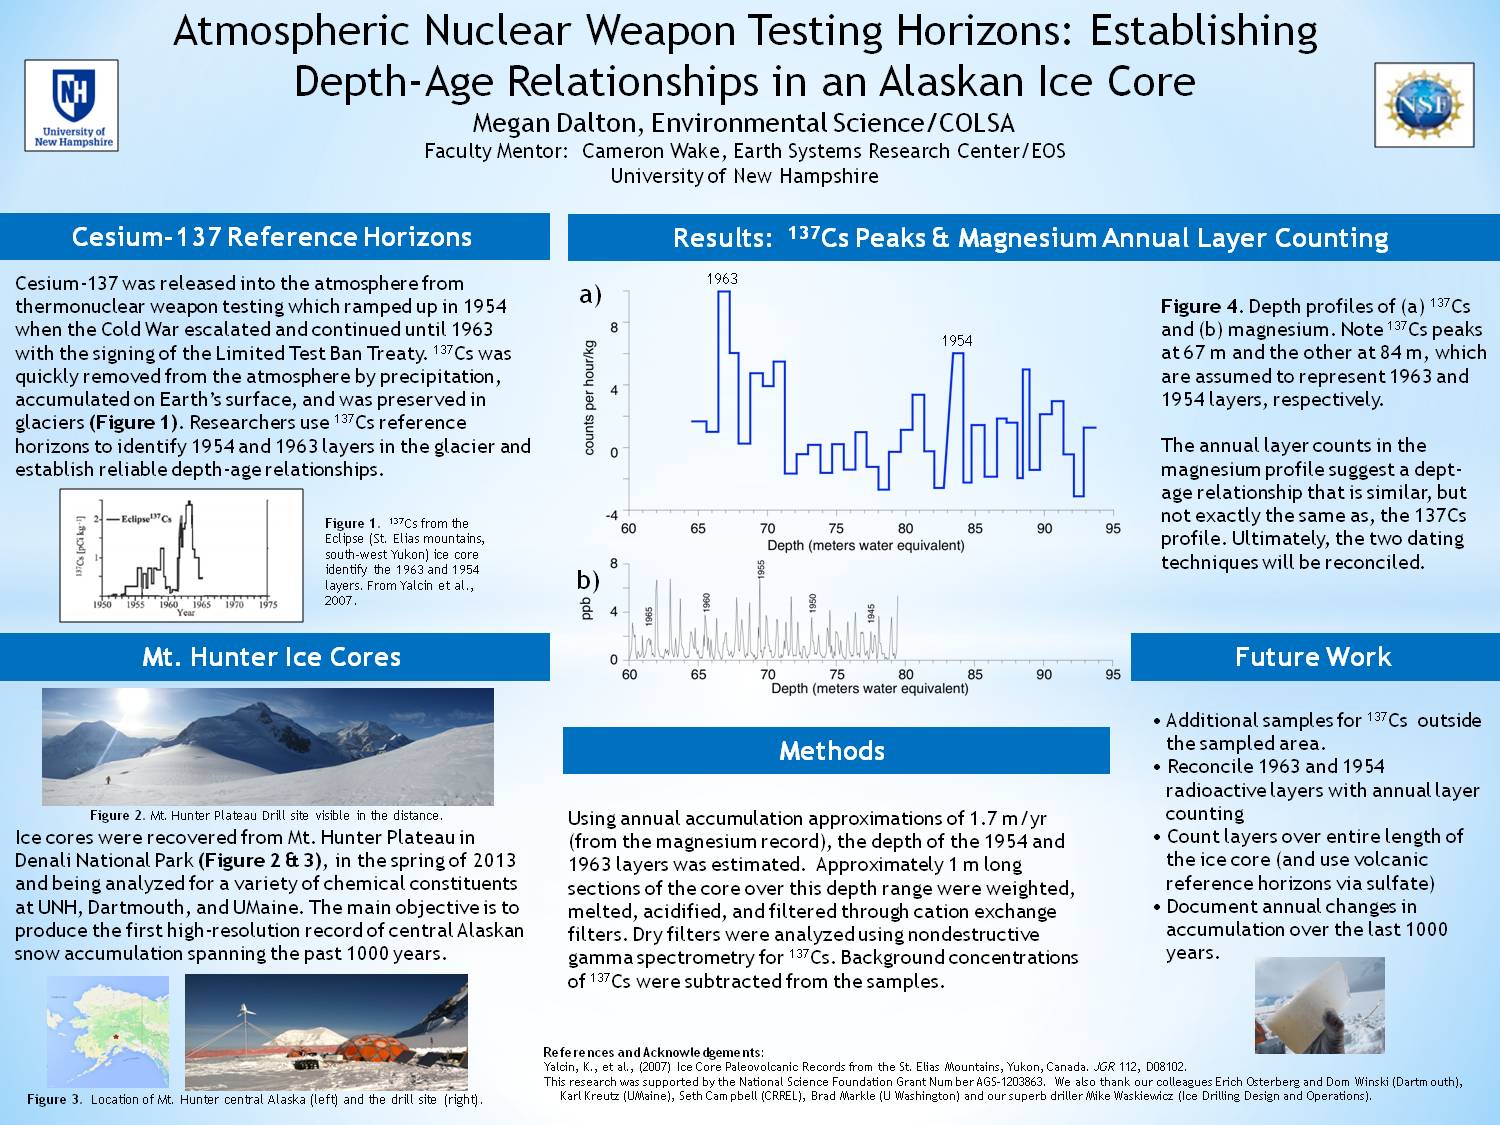 Atmospheric Nuclear Weapon Testing Horizons: Establishing Depth-Age Relationships In An Alaskan Ice Core by meo243